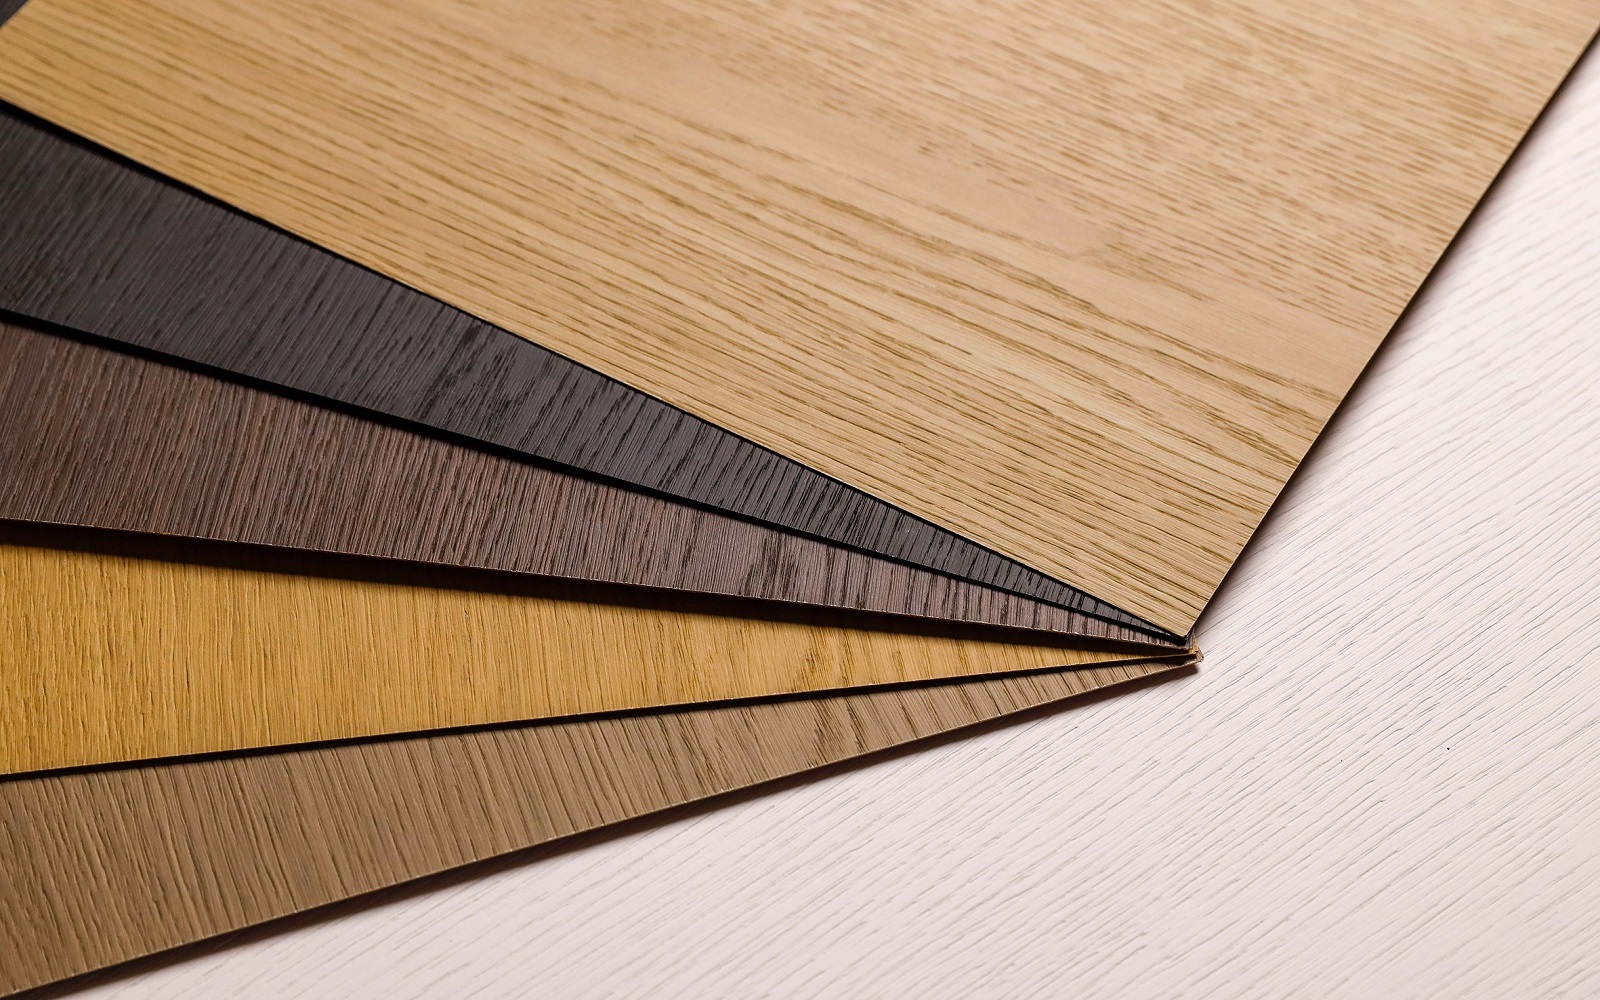 master oak by Unilin in five natural wood colourways